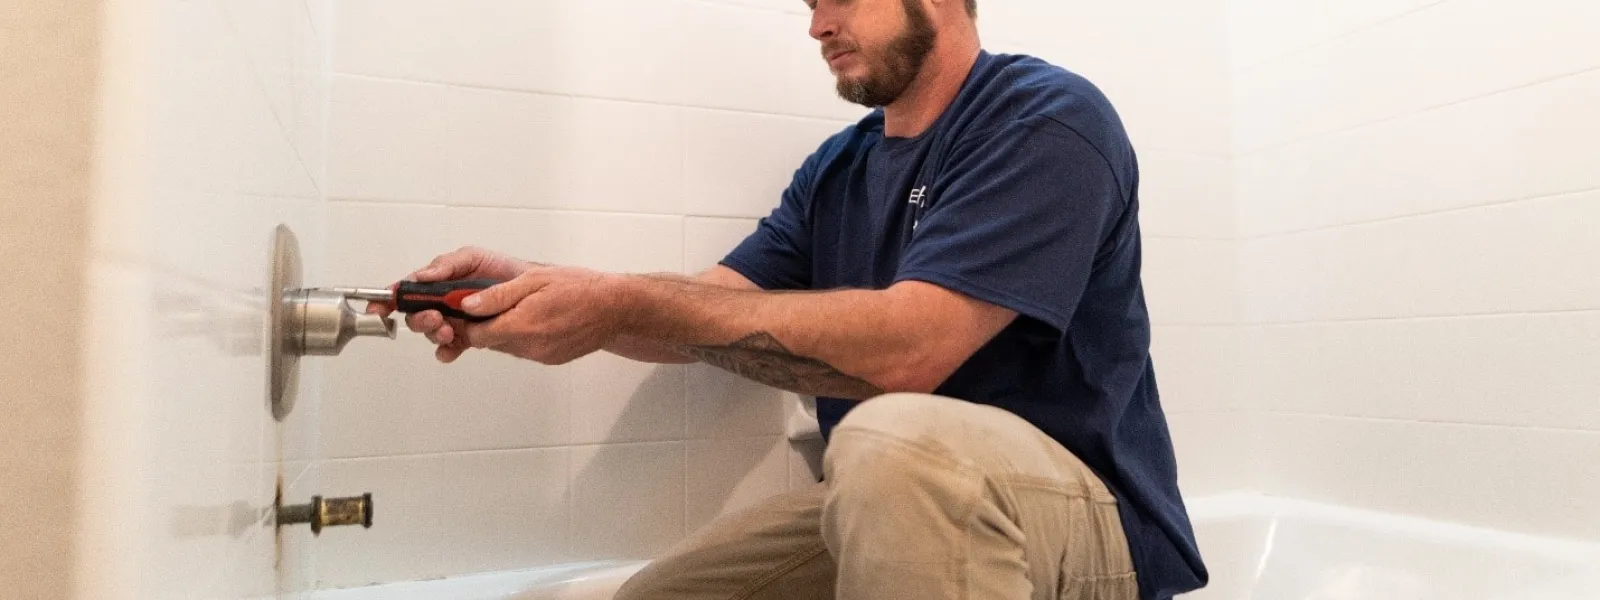 How Expo Uses Master Plumbers for Bathroom Remodels